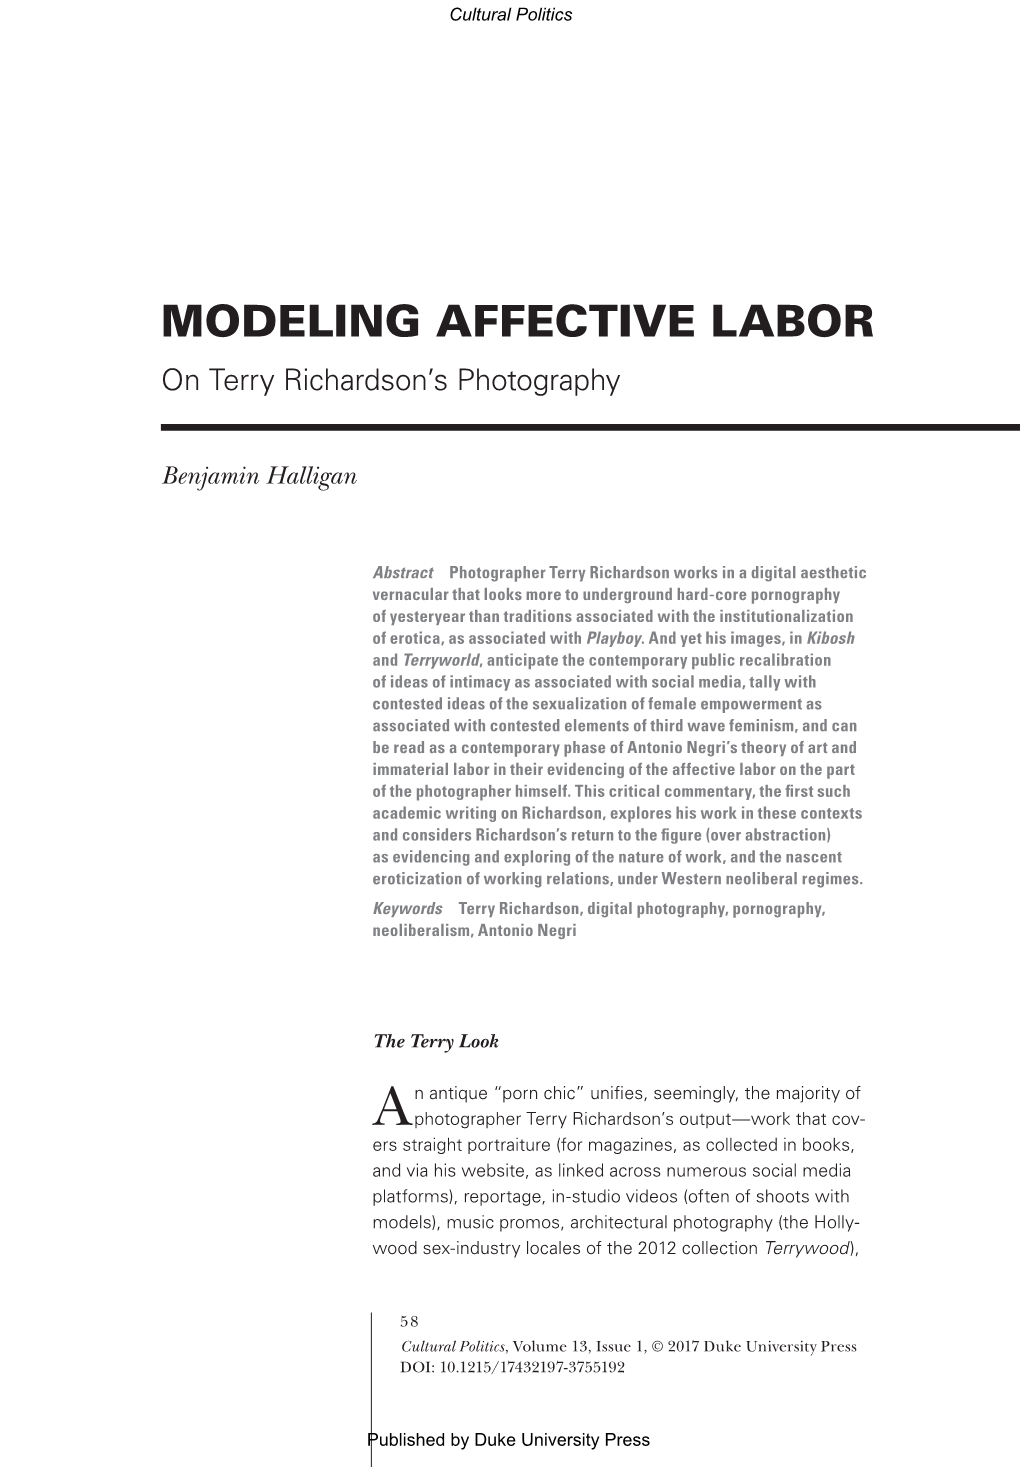 MODELING AFFECTIVE LABOR on Terry Richardson’S Photography